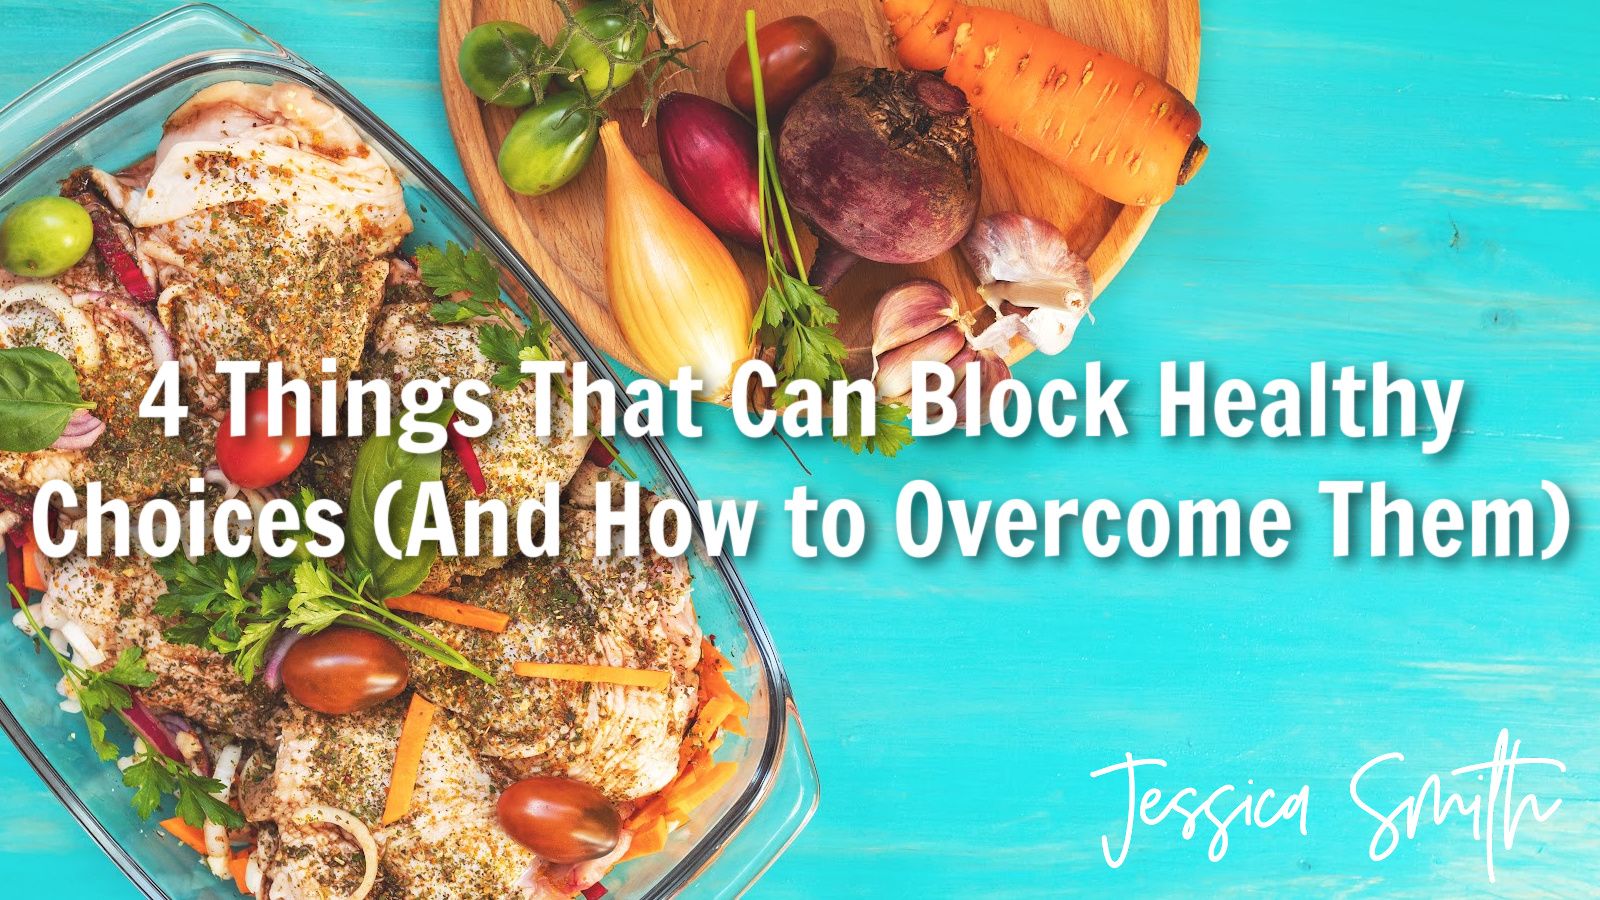 4 Things That Can Block Your Healthy Choices (And How to Overcome Them)